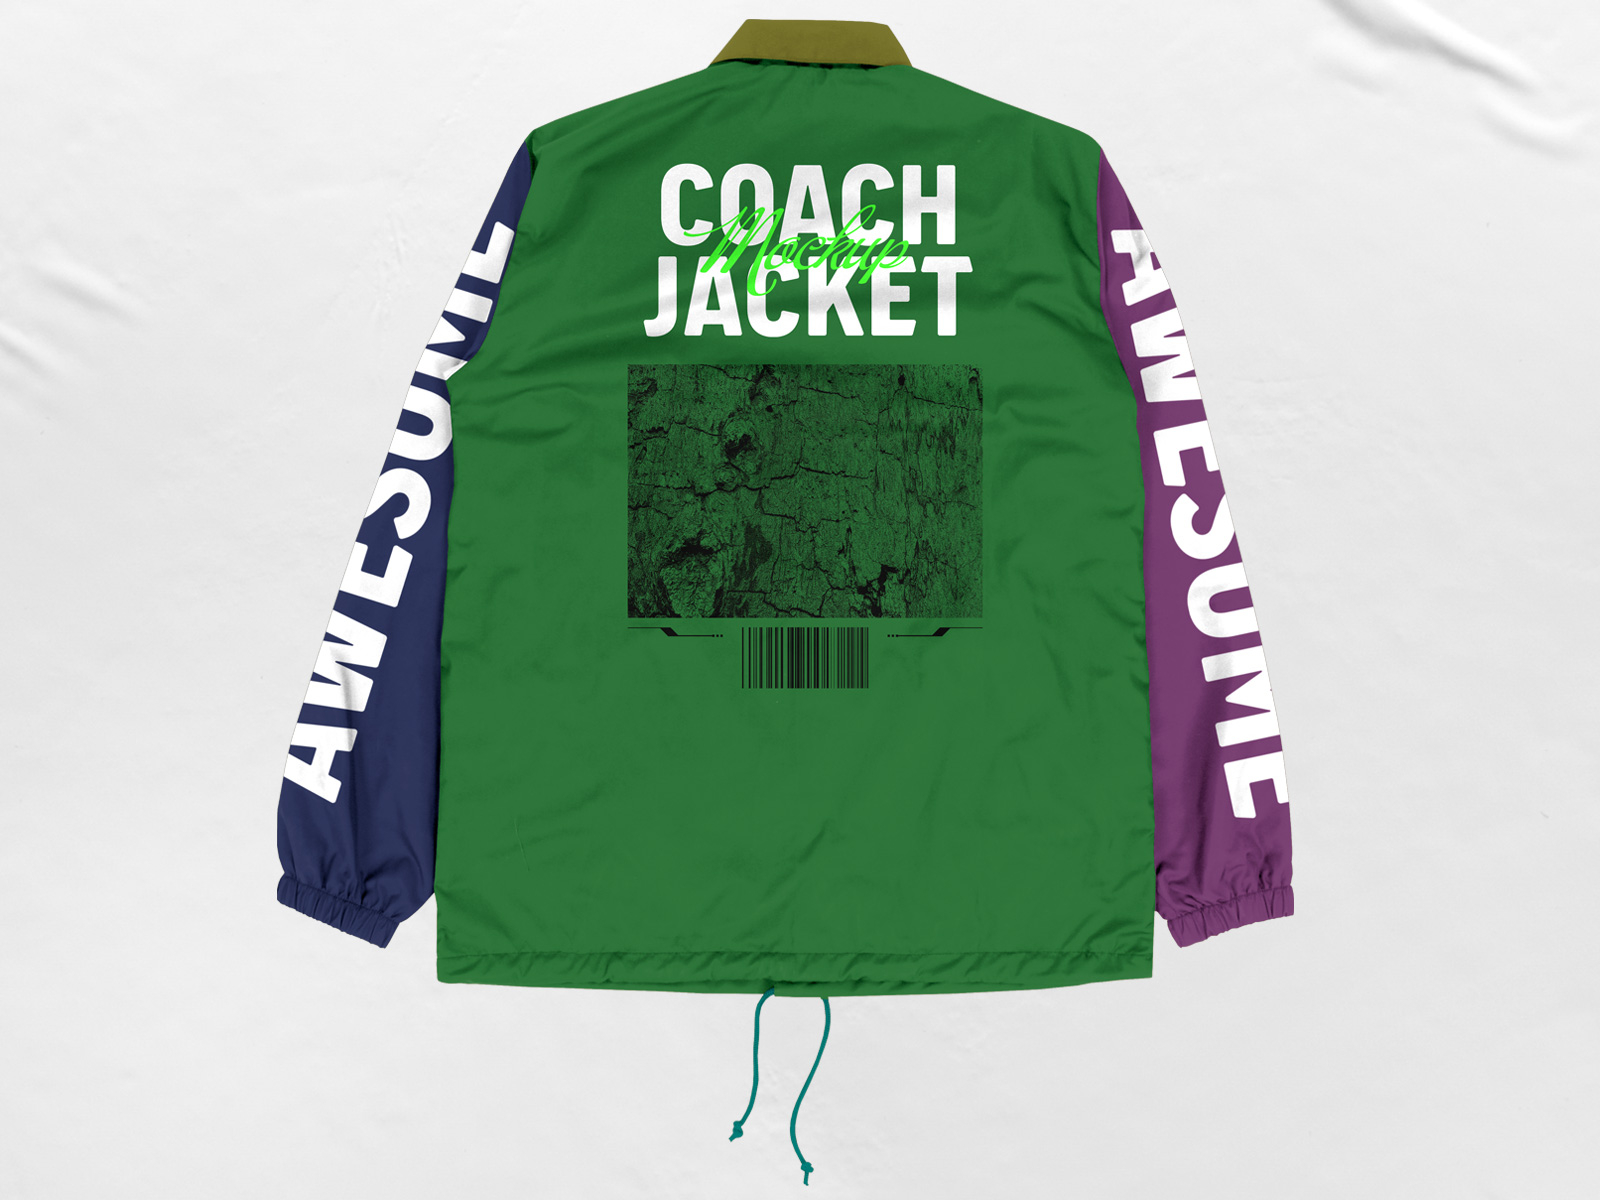 Coach Jacket designs, themes, templates and downloadable graphic